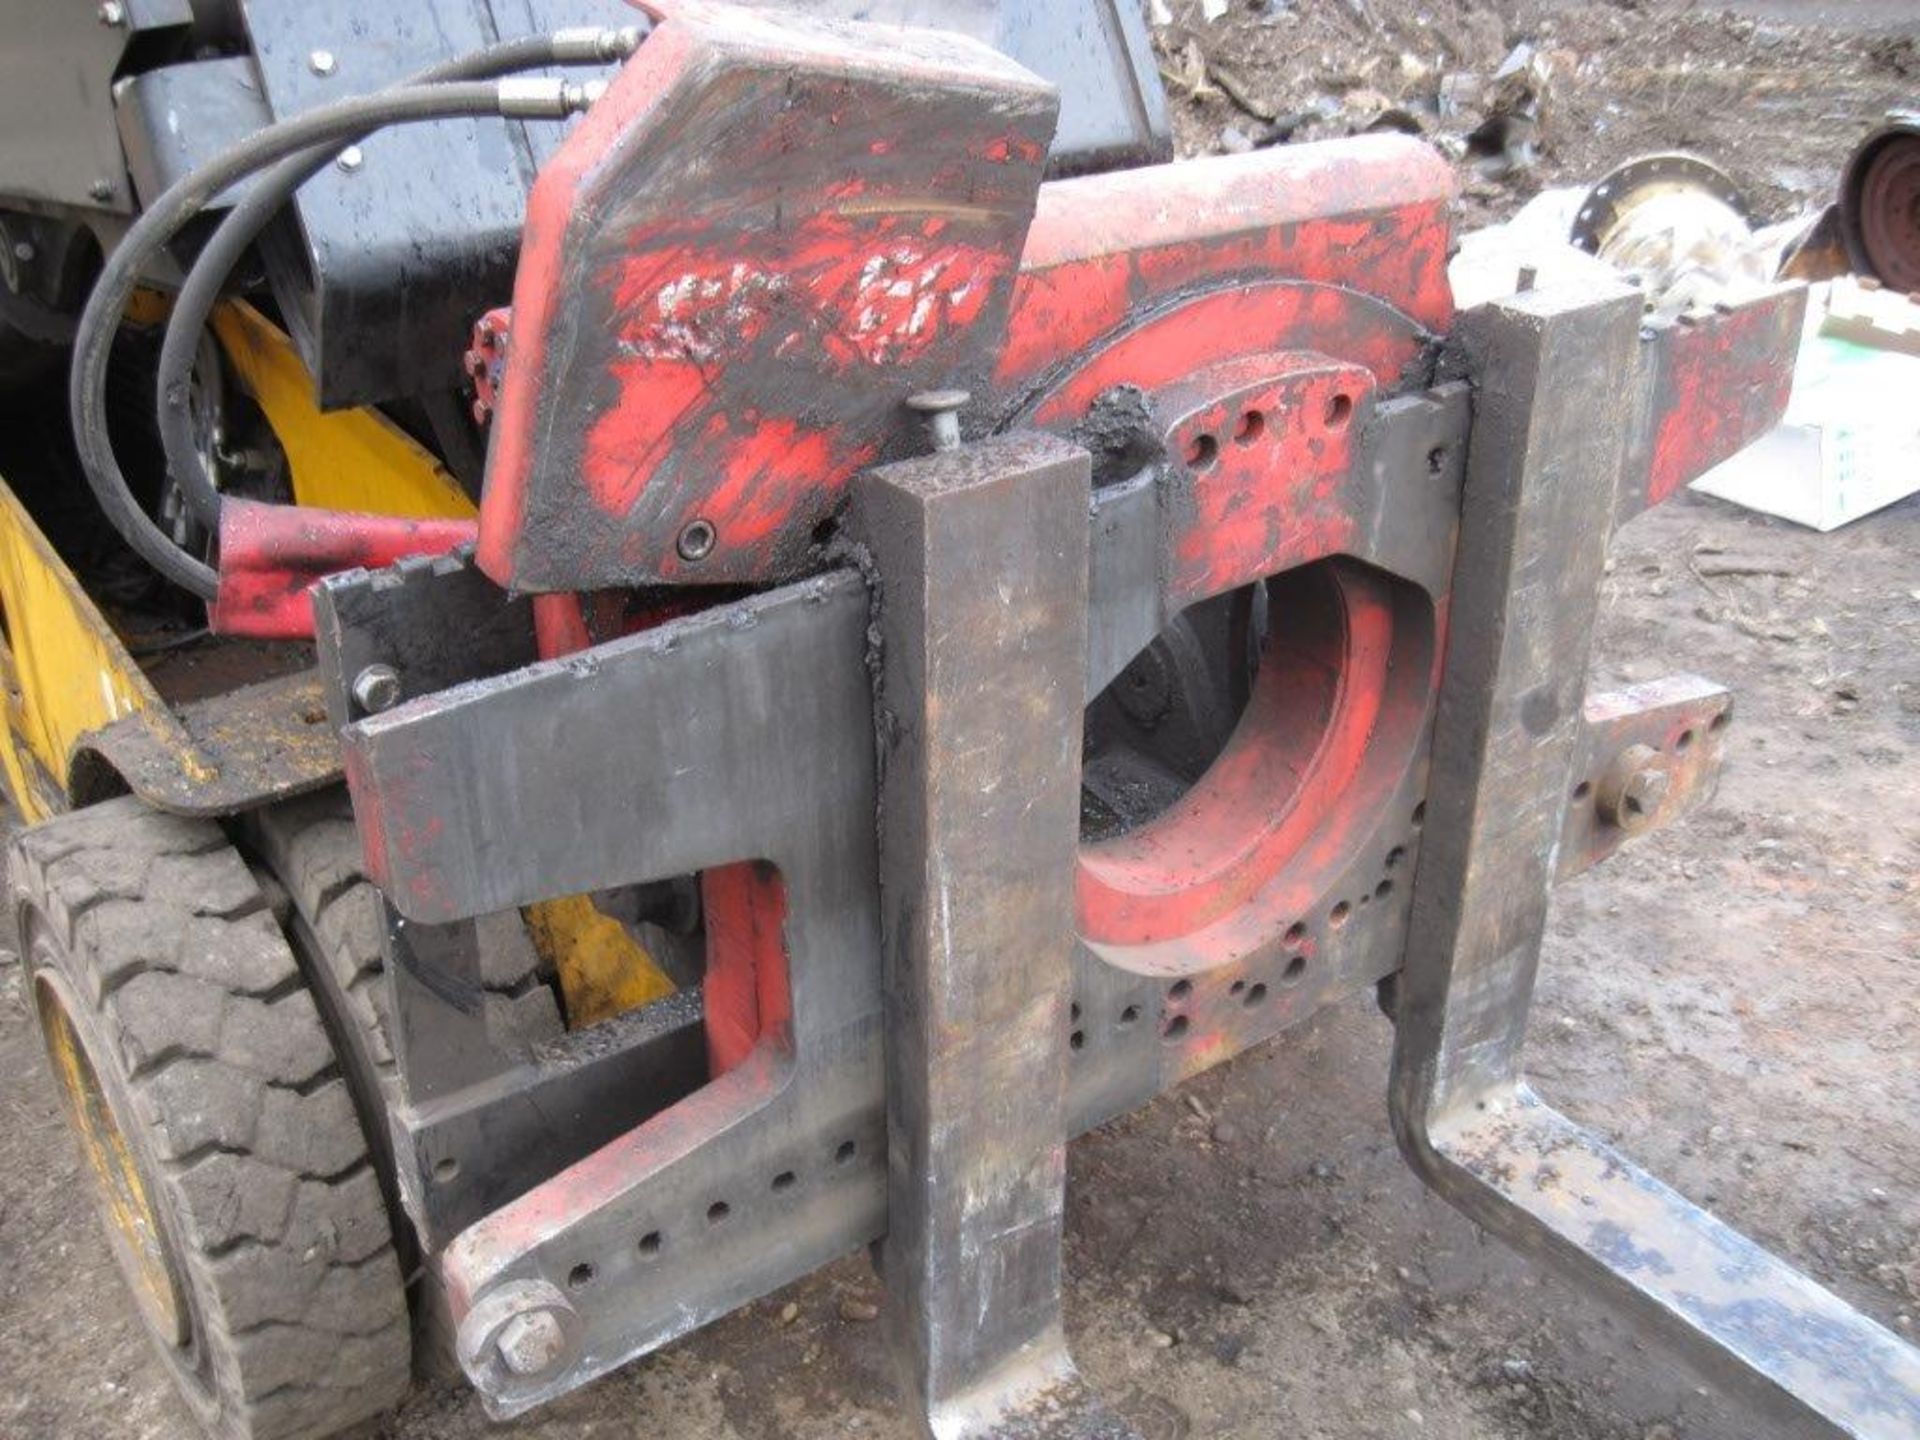 Rotating Pallet Forks with Long Tines - Auction is for forks only, jcb machine not available